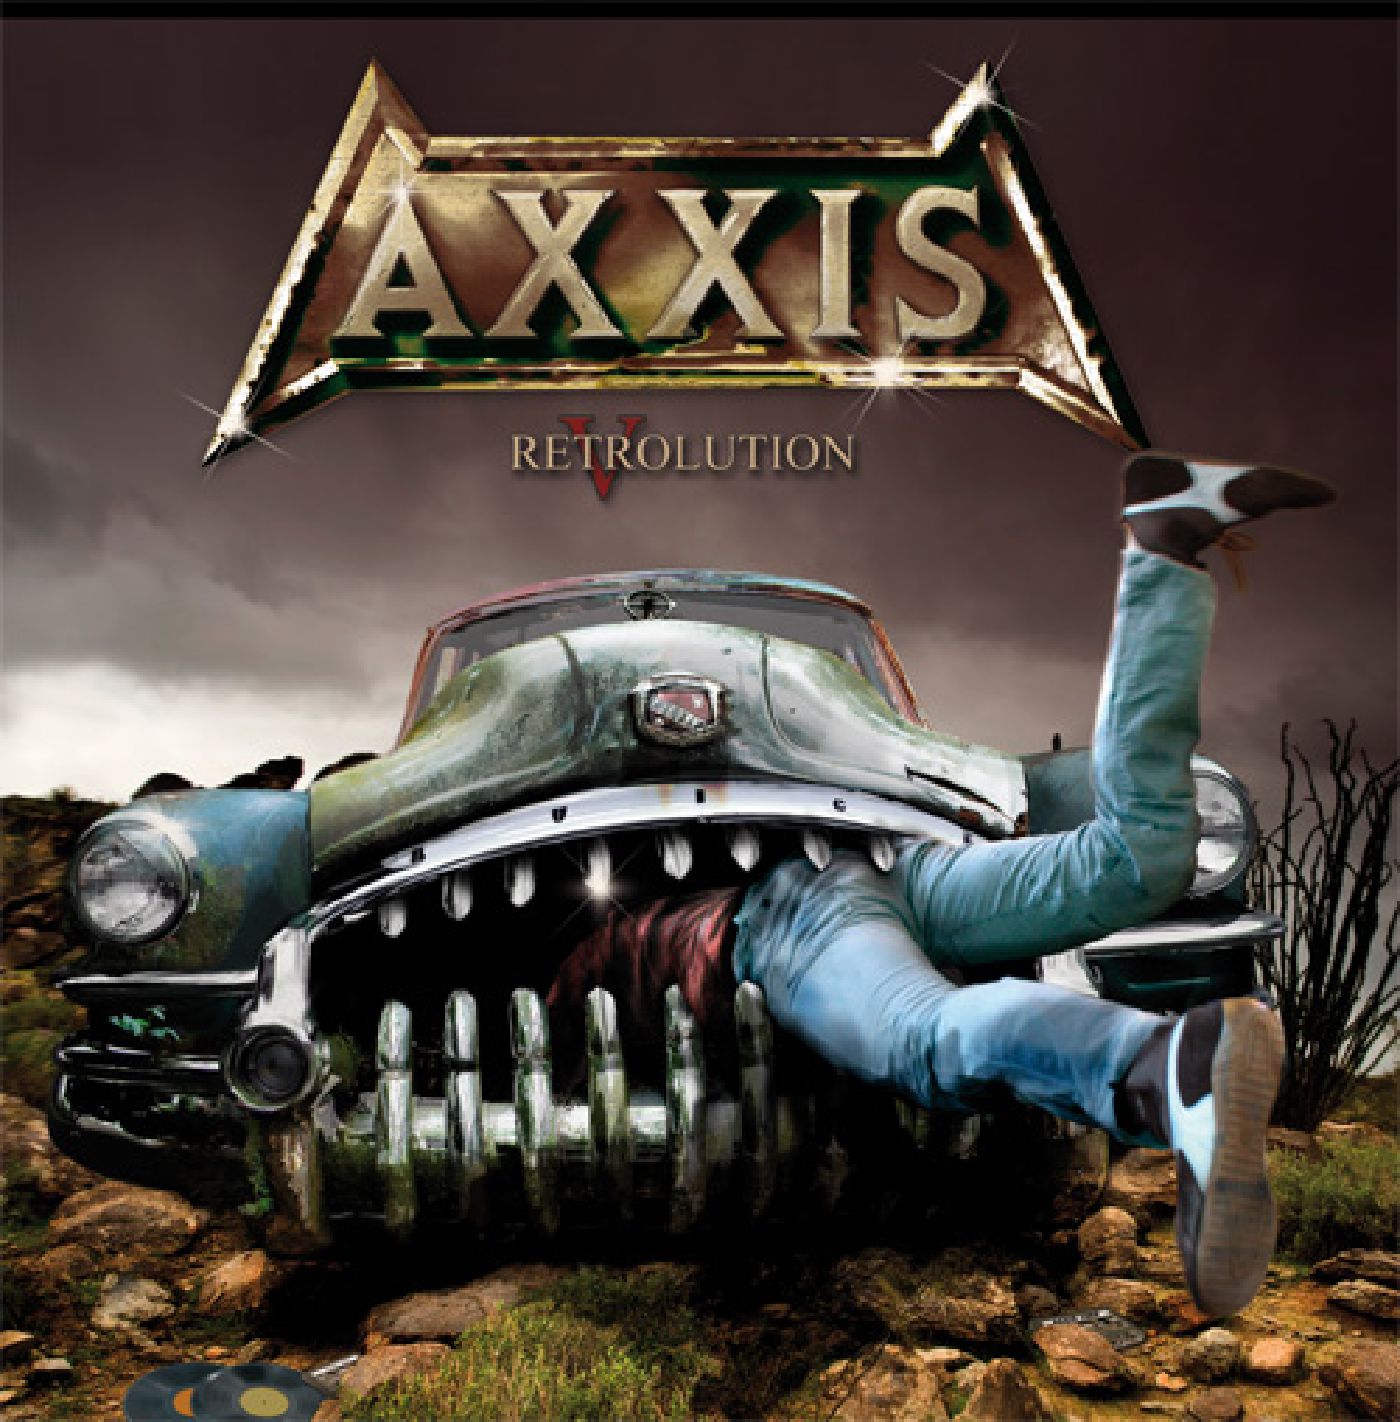 AXXIS Retrolution 2017